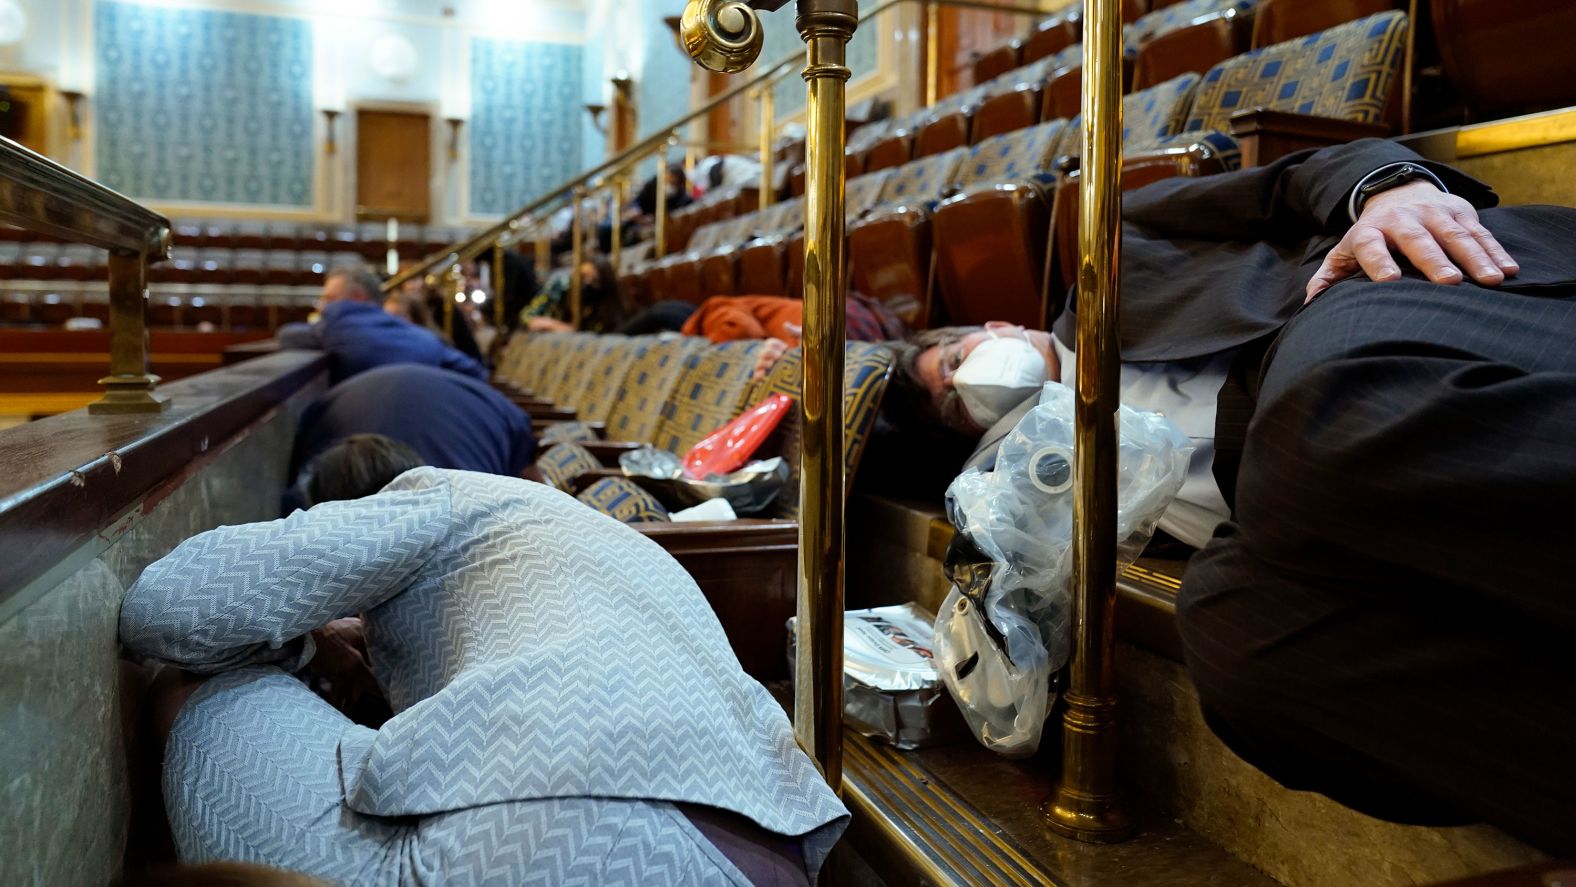 People take shelter in the House chamber as rioters try to break in. House members were given gas masks that were under the seats, according to a pool reporter on the House floor.